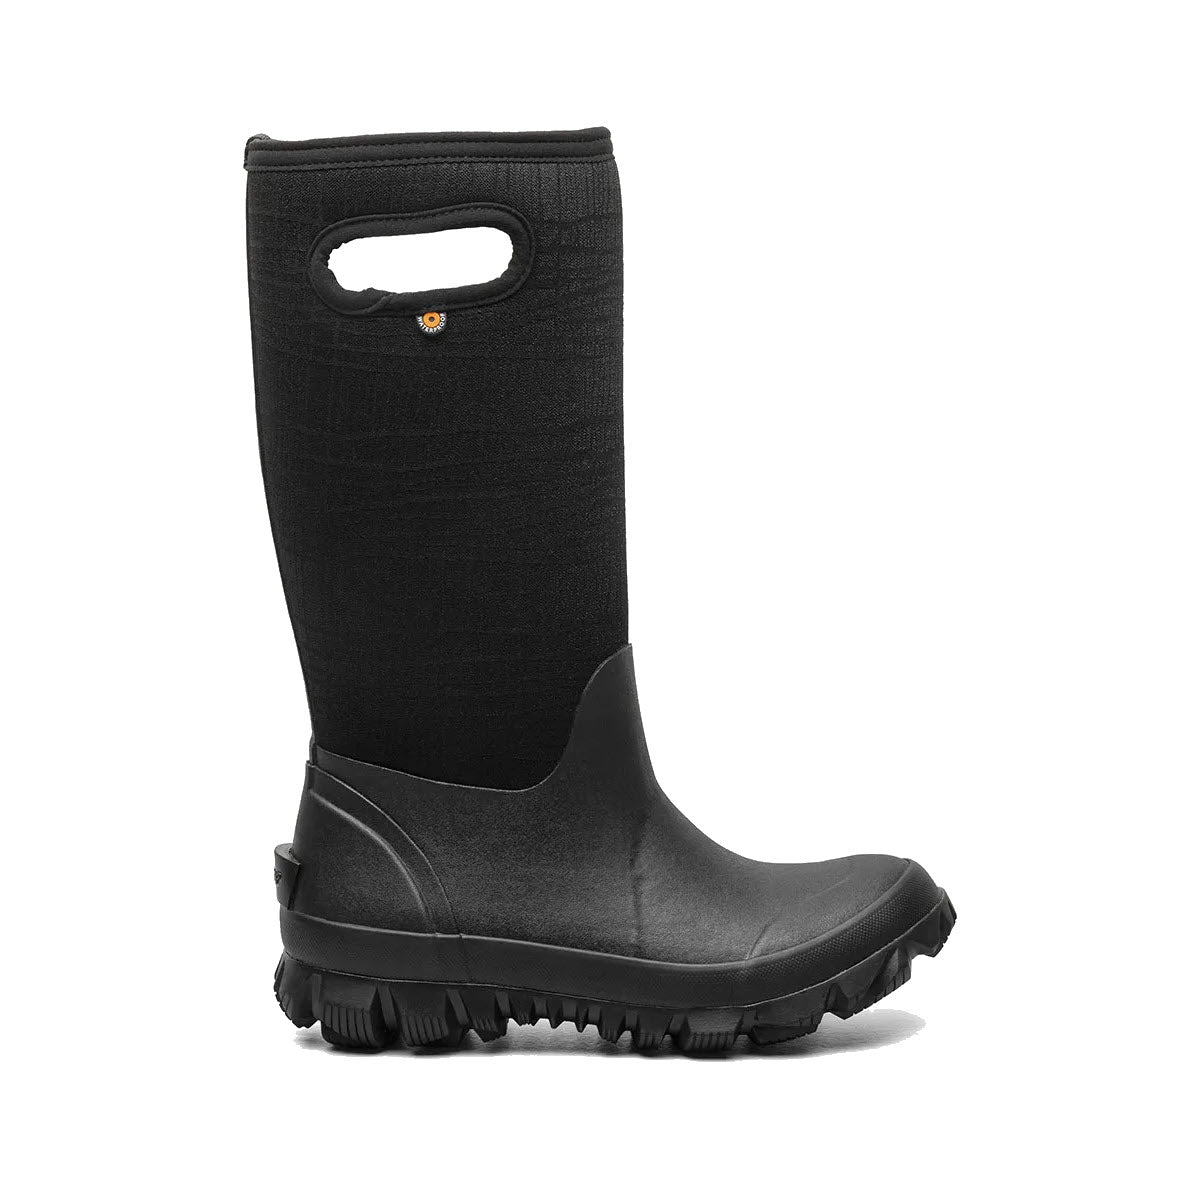 Bogs WhiteOut Cracks Black women&#39;s boot with a tall, textured fabric shaft and a fleece lining, isolated on a white background.